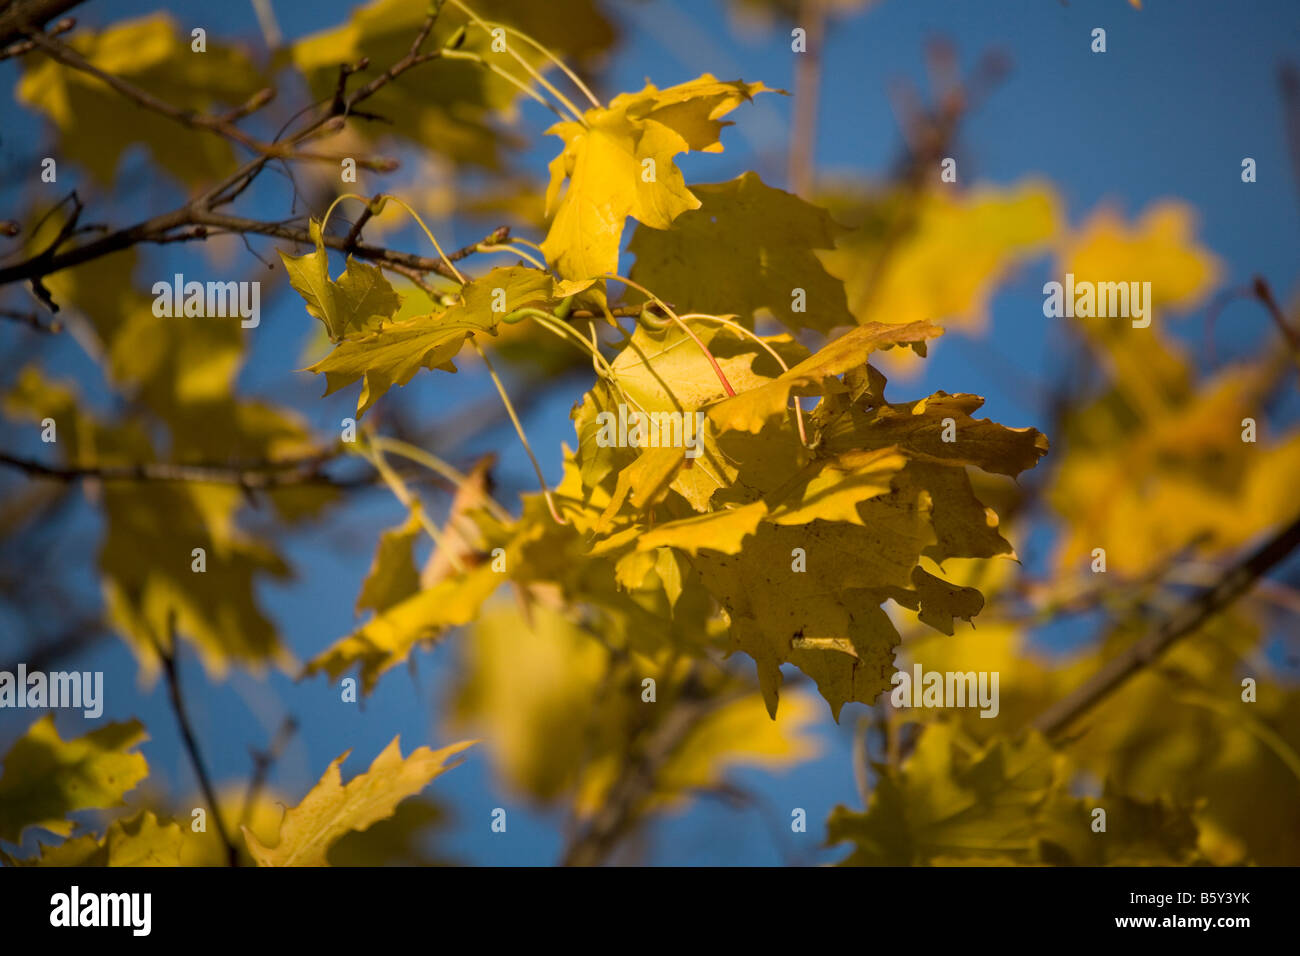 The golden leaves of an autumnal tree in northern England. A bright blue day helps emphasise the natural beauty of the leaves. Stock Photo